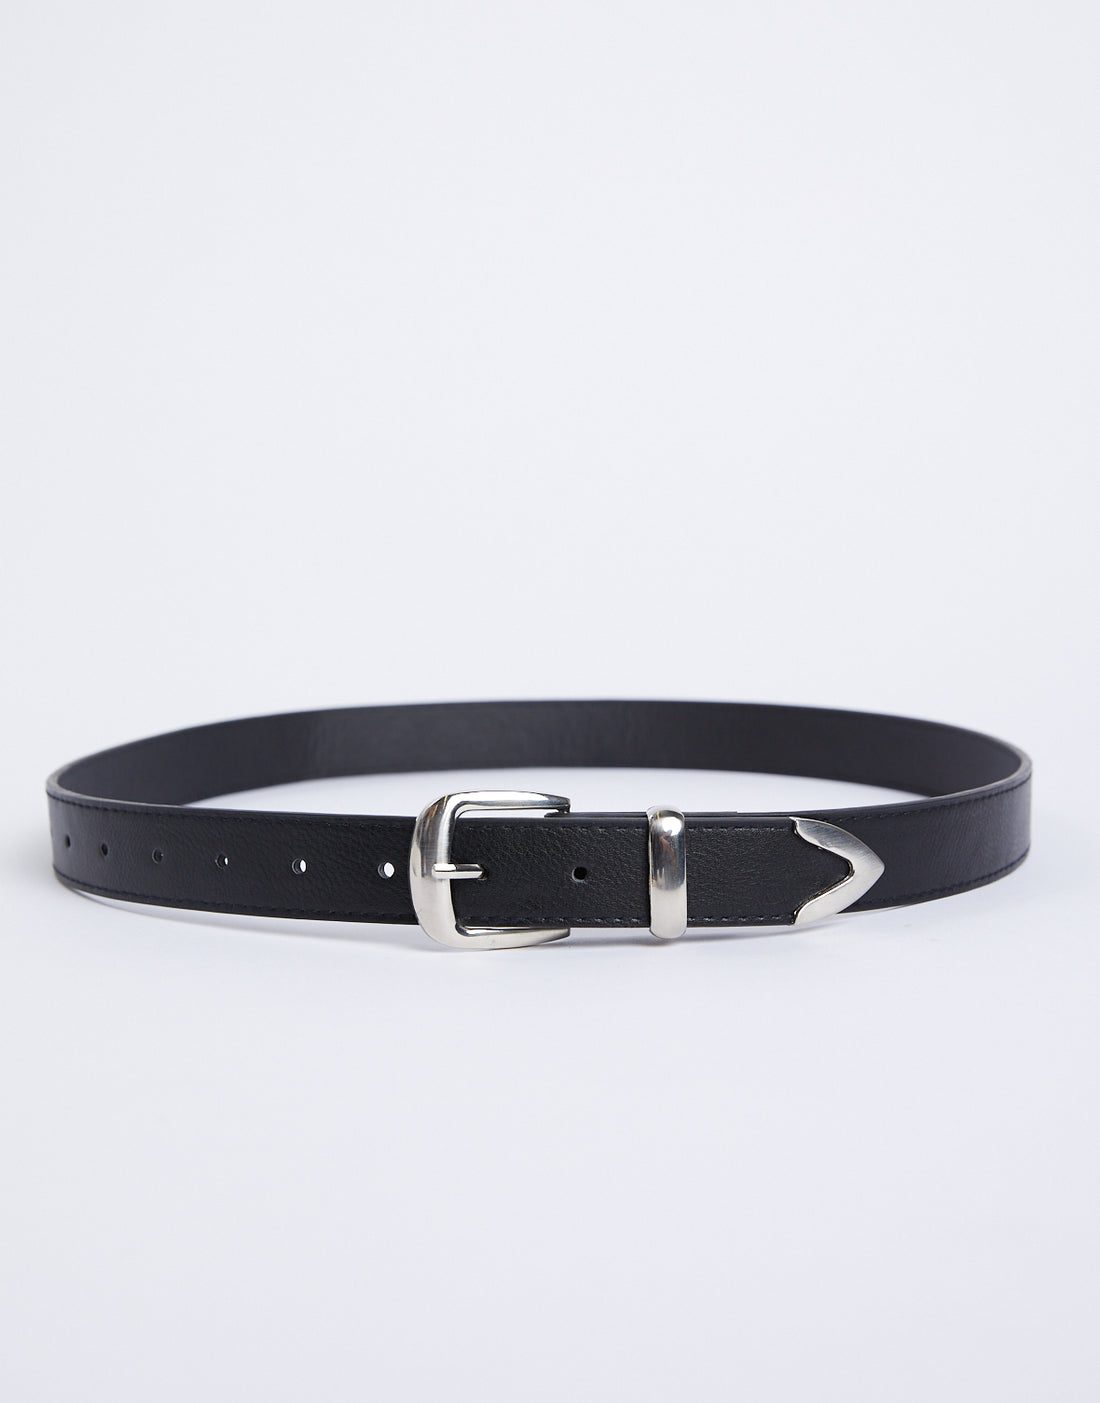 All About You Belt Accessories Black One Size -2020AVE